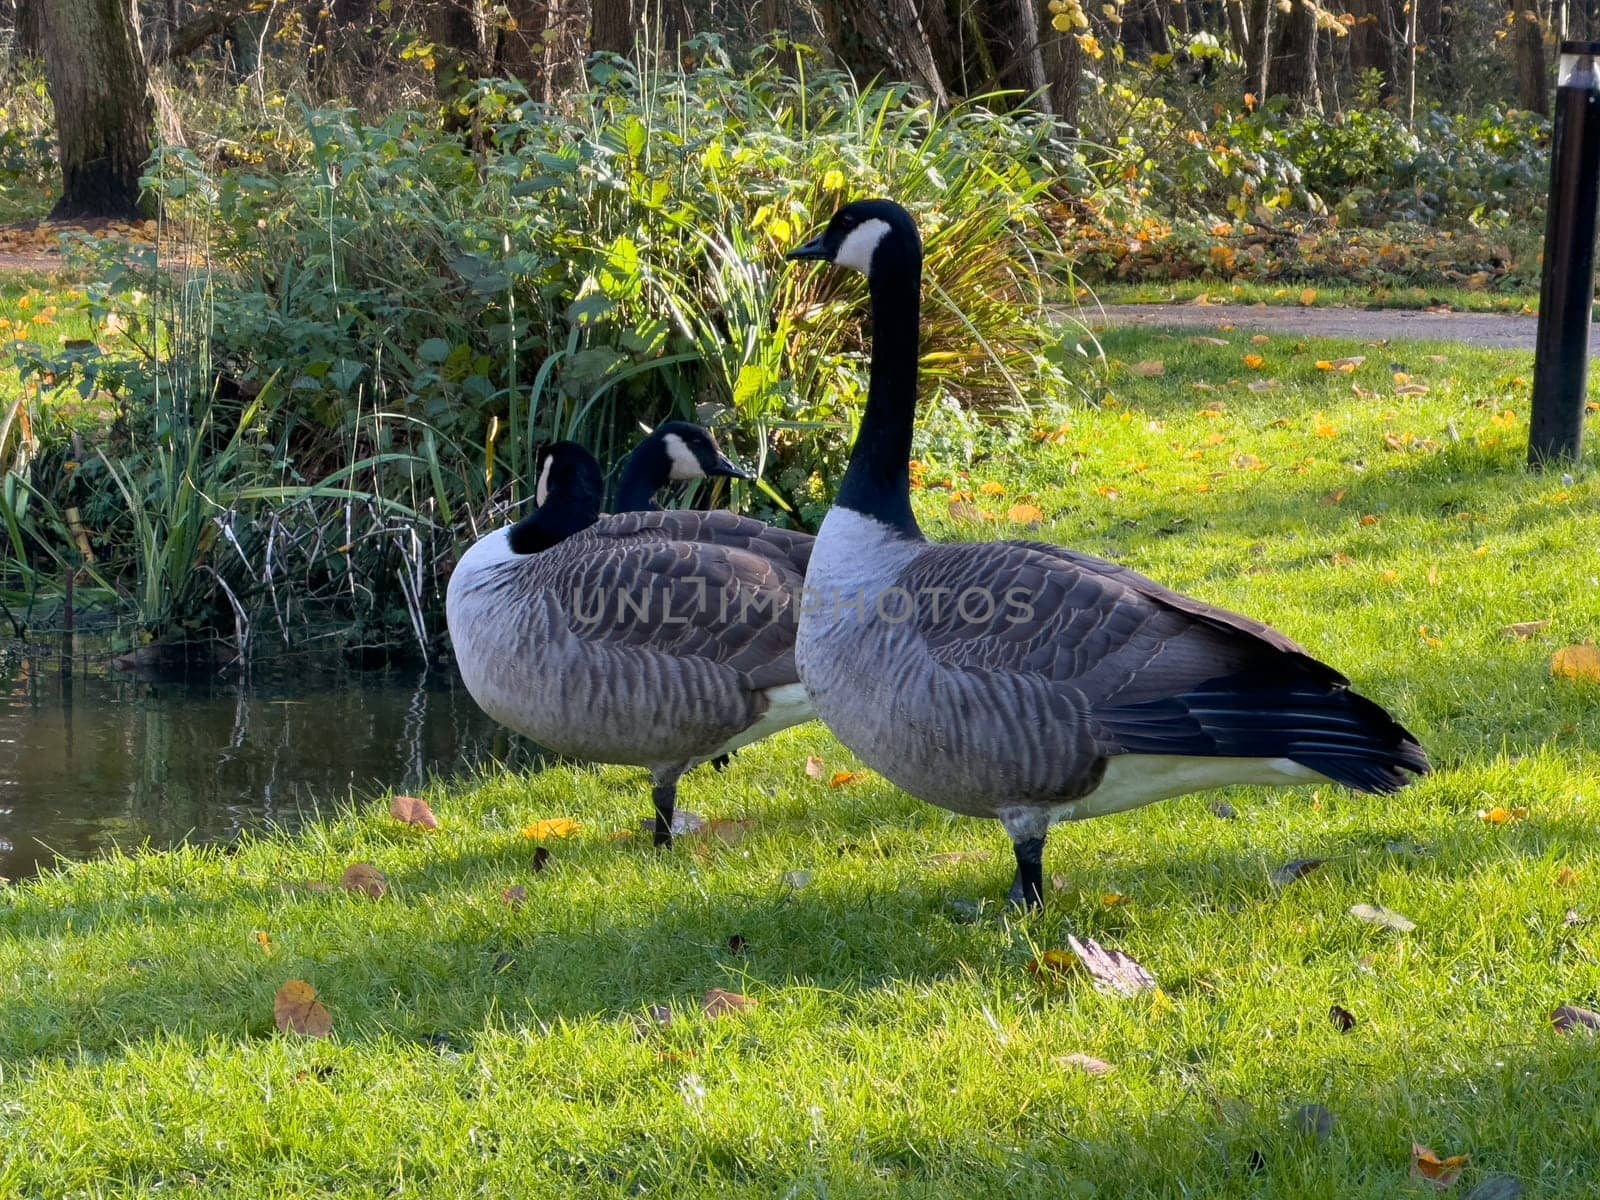 Bar Headed Gooses on the grass in a park next to the lake